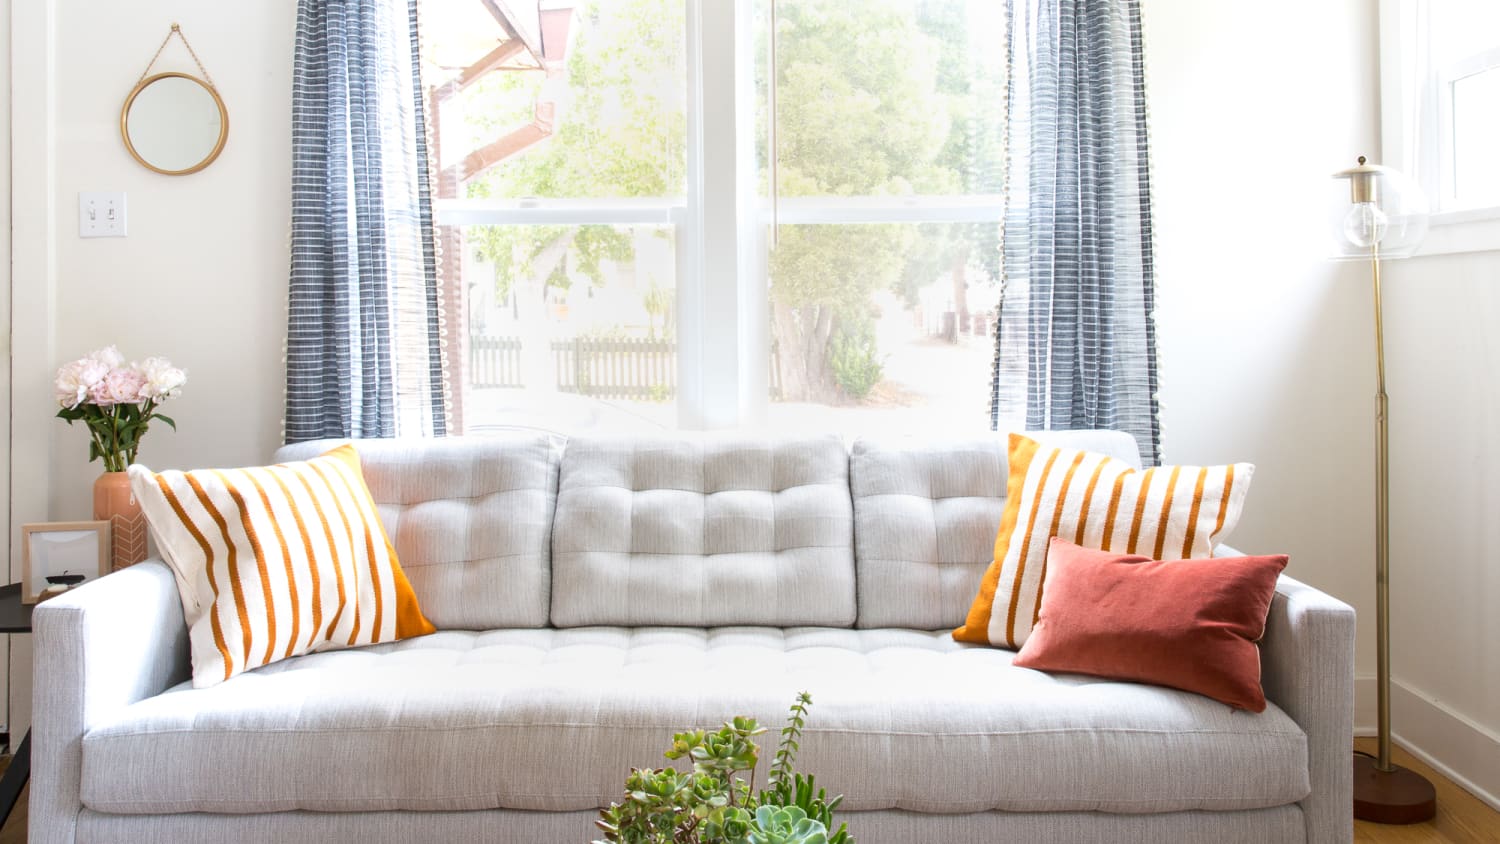 Can't afford that West Elm sofa? Rent it instead. - The Washington Post